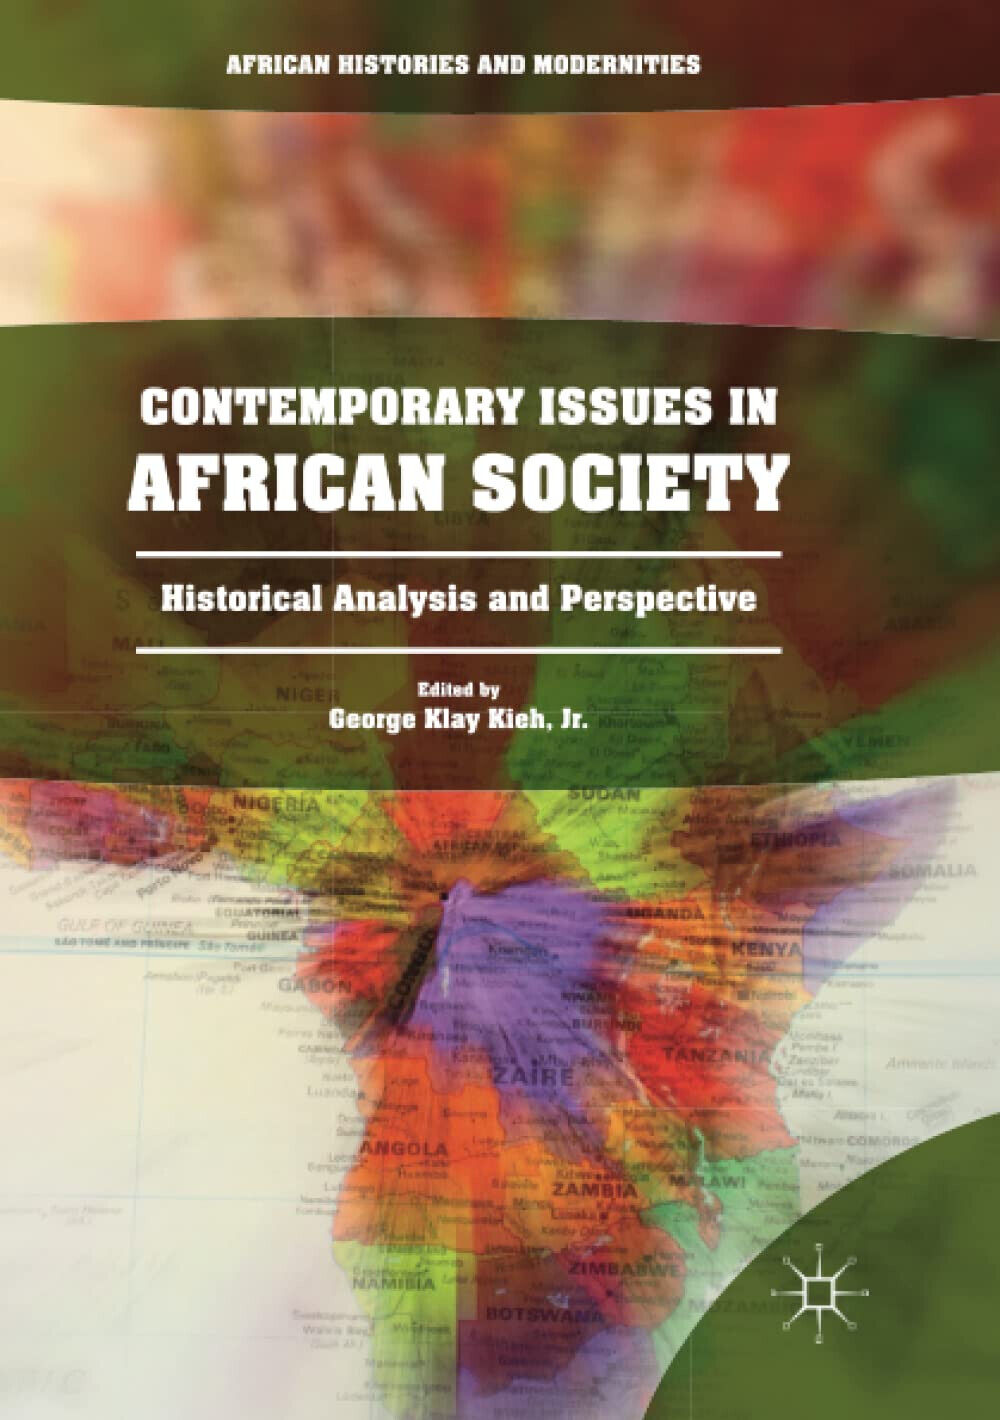 Contemporary Issues in African Society - George Klay Kieh - Palgrave, 2018